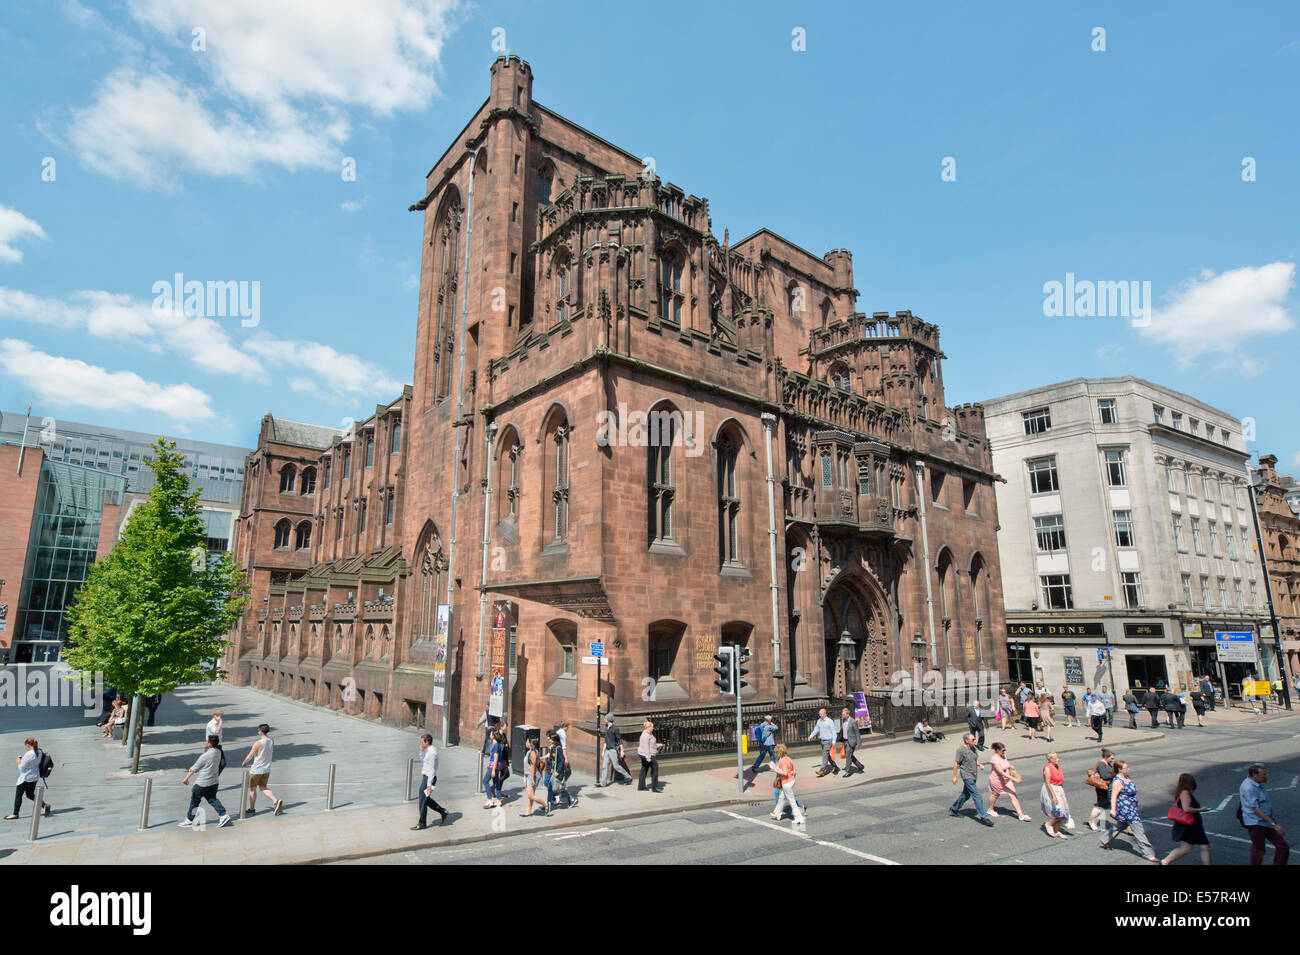 The historic late-Victorian neo-Gothic John Rylands Library building on Deansgate in Manchester which opened in 1900. Stock Photo